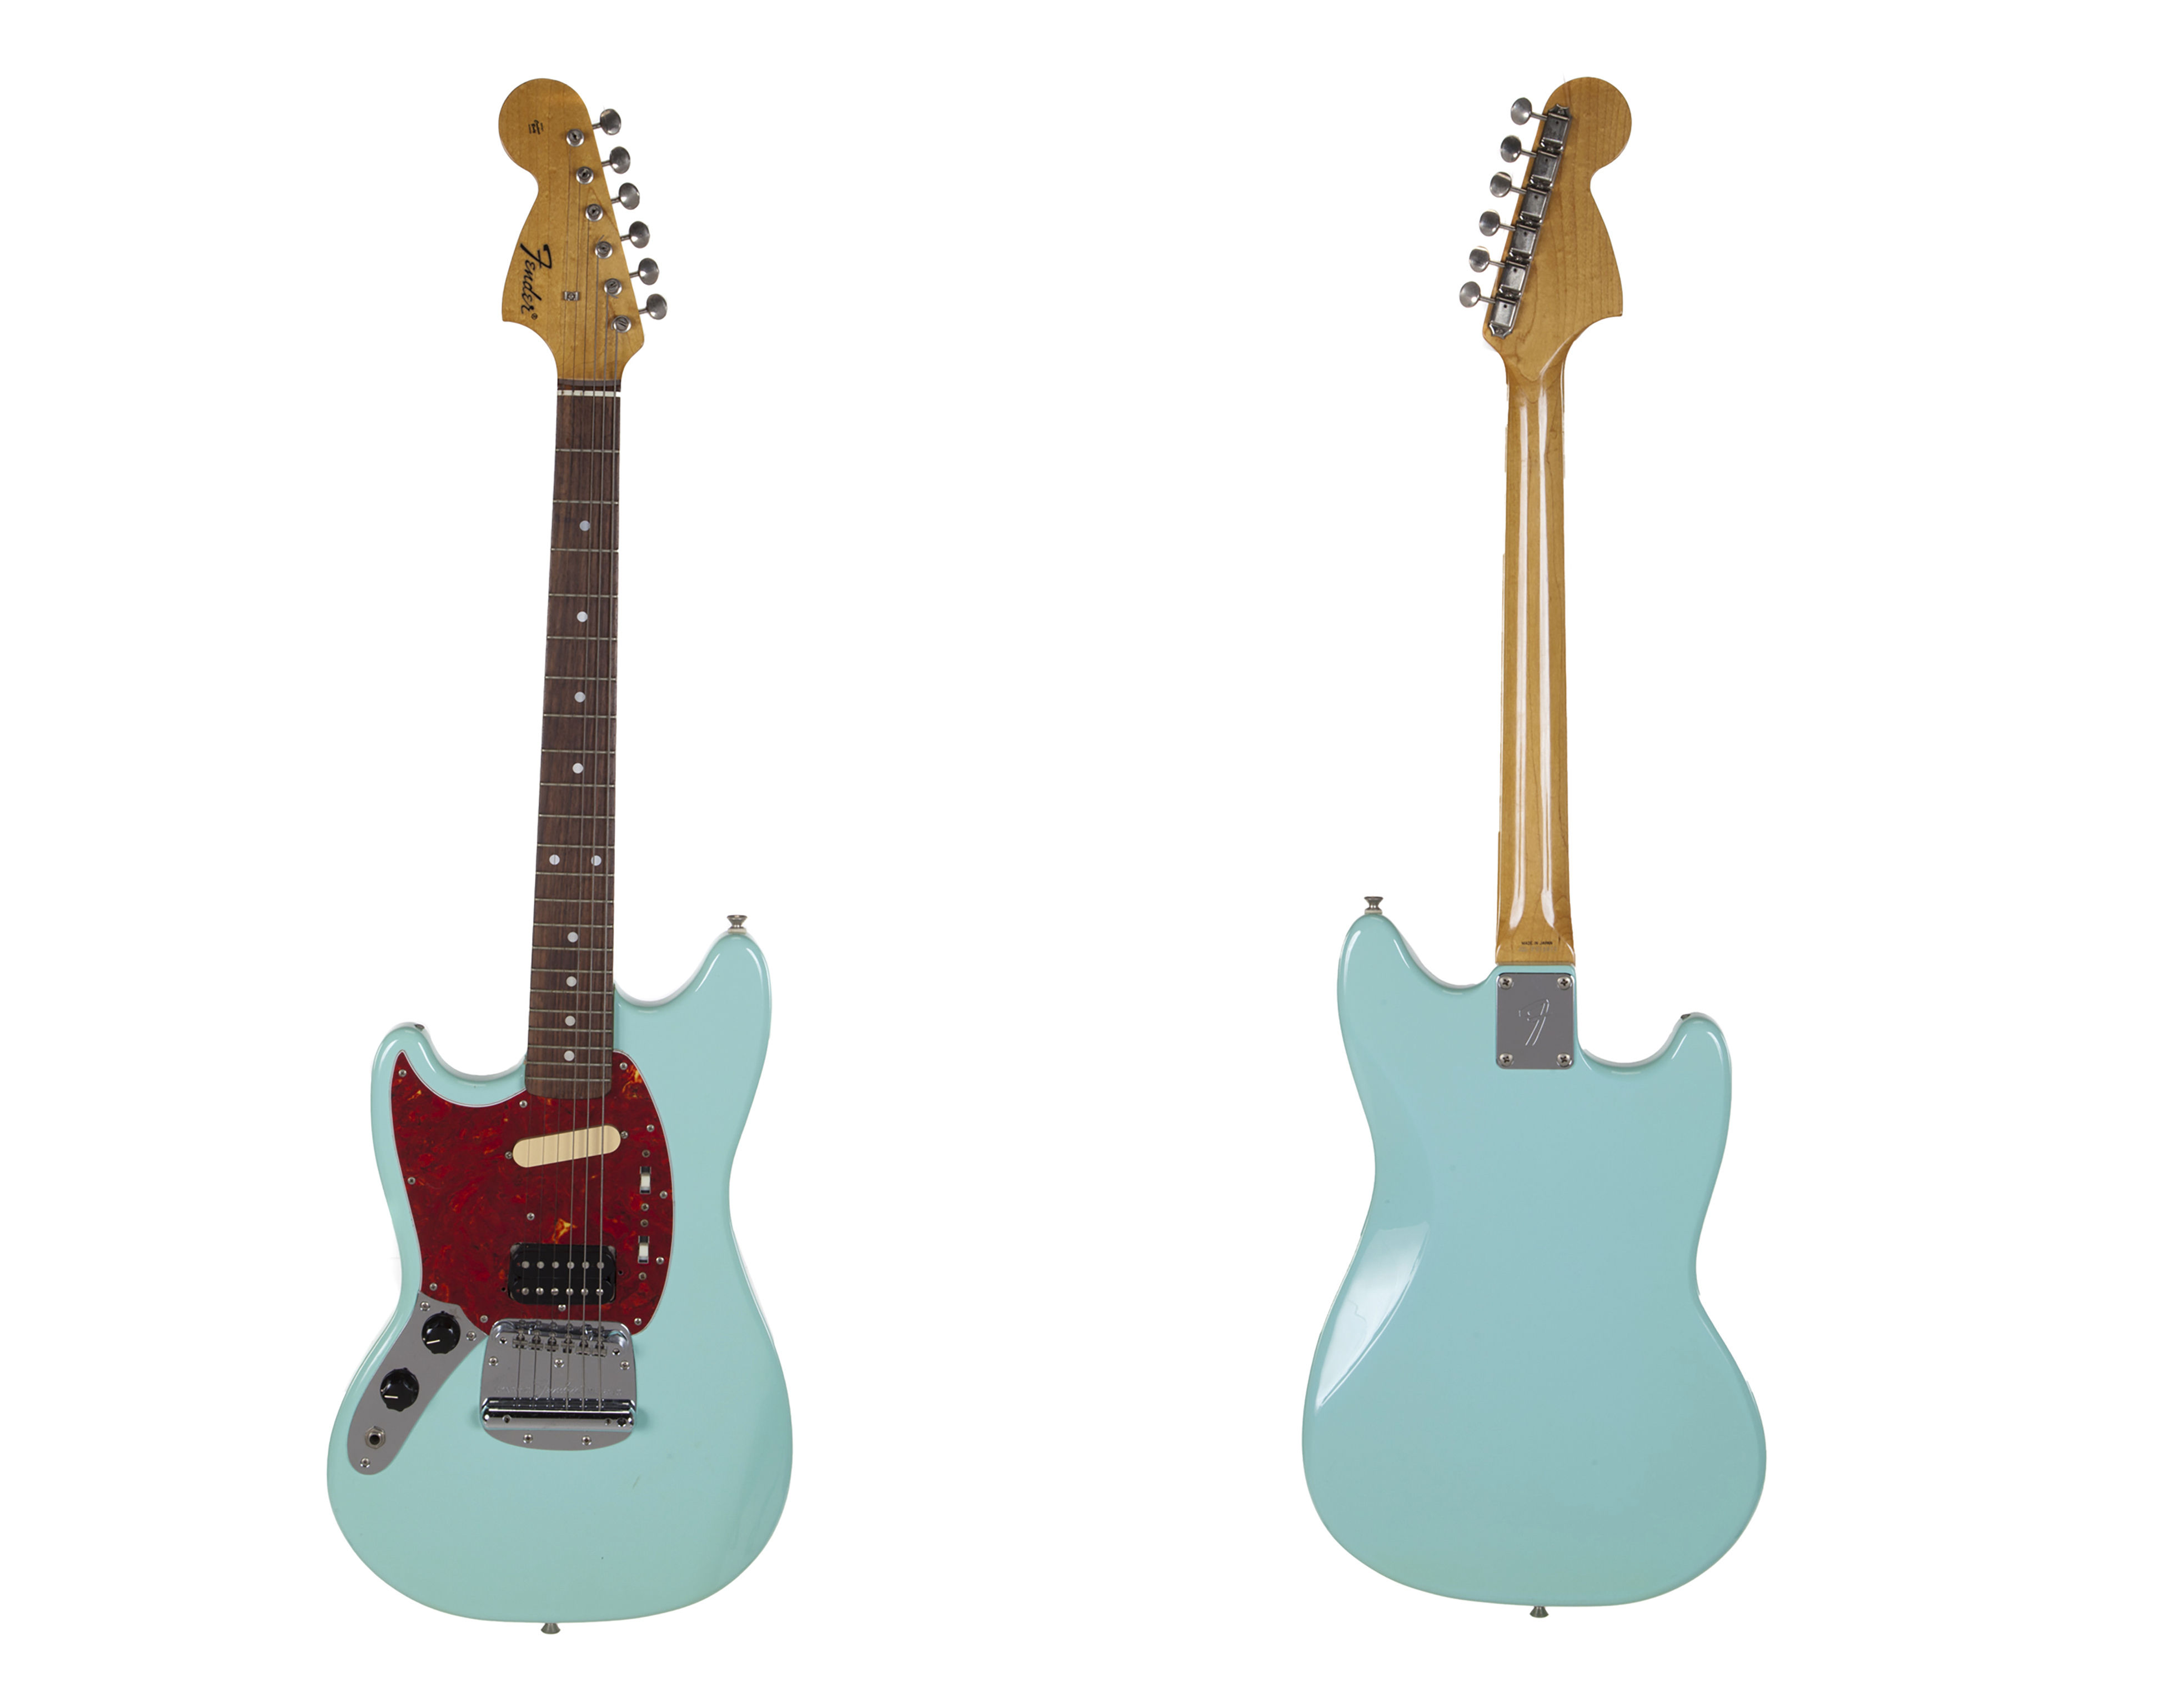 The Fender used by Kurt Cobain during Nirvana's In Utero tour 